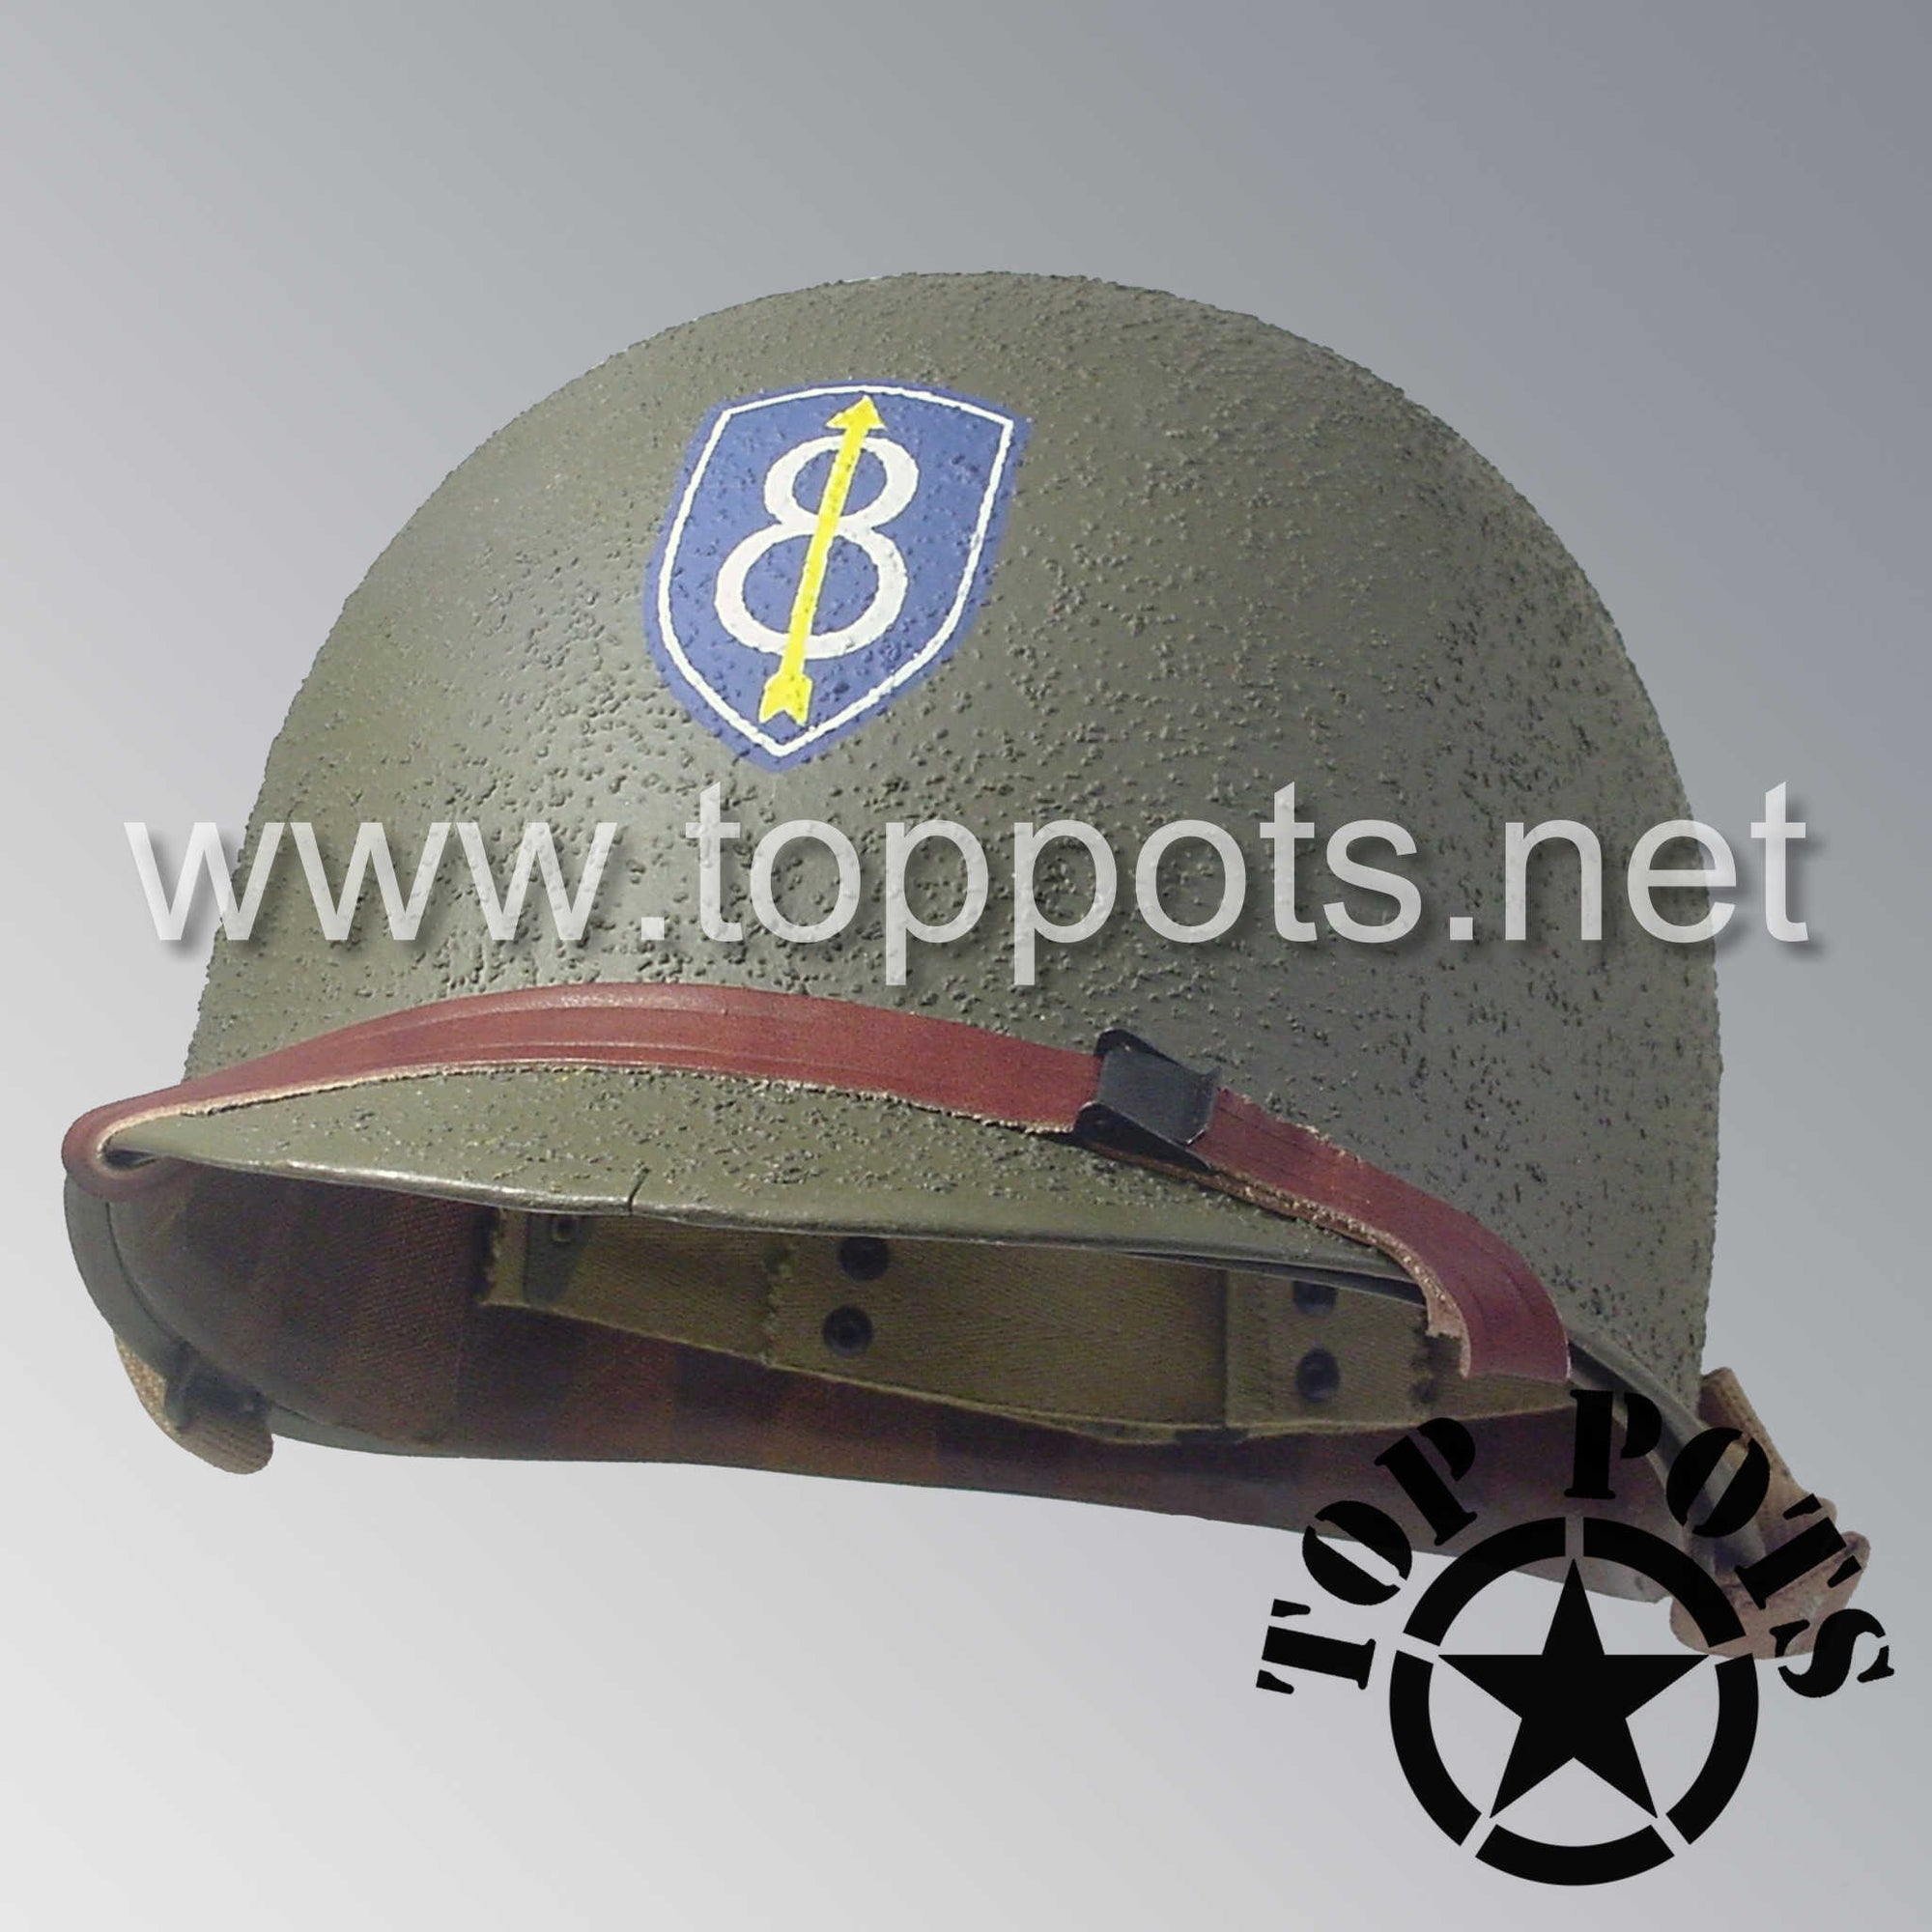 WWII US Army Restored Original M1 Infantry Helmet Swivel Bale Shell and Liner with 8th Infantry Division Emblem